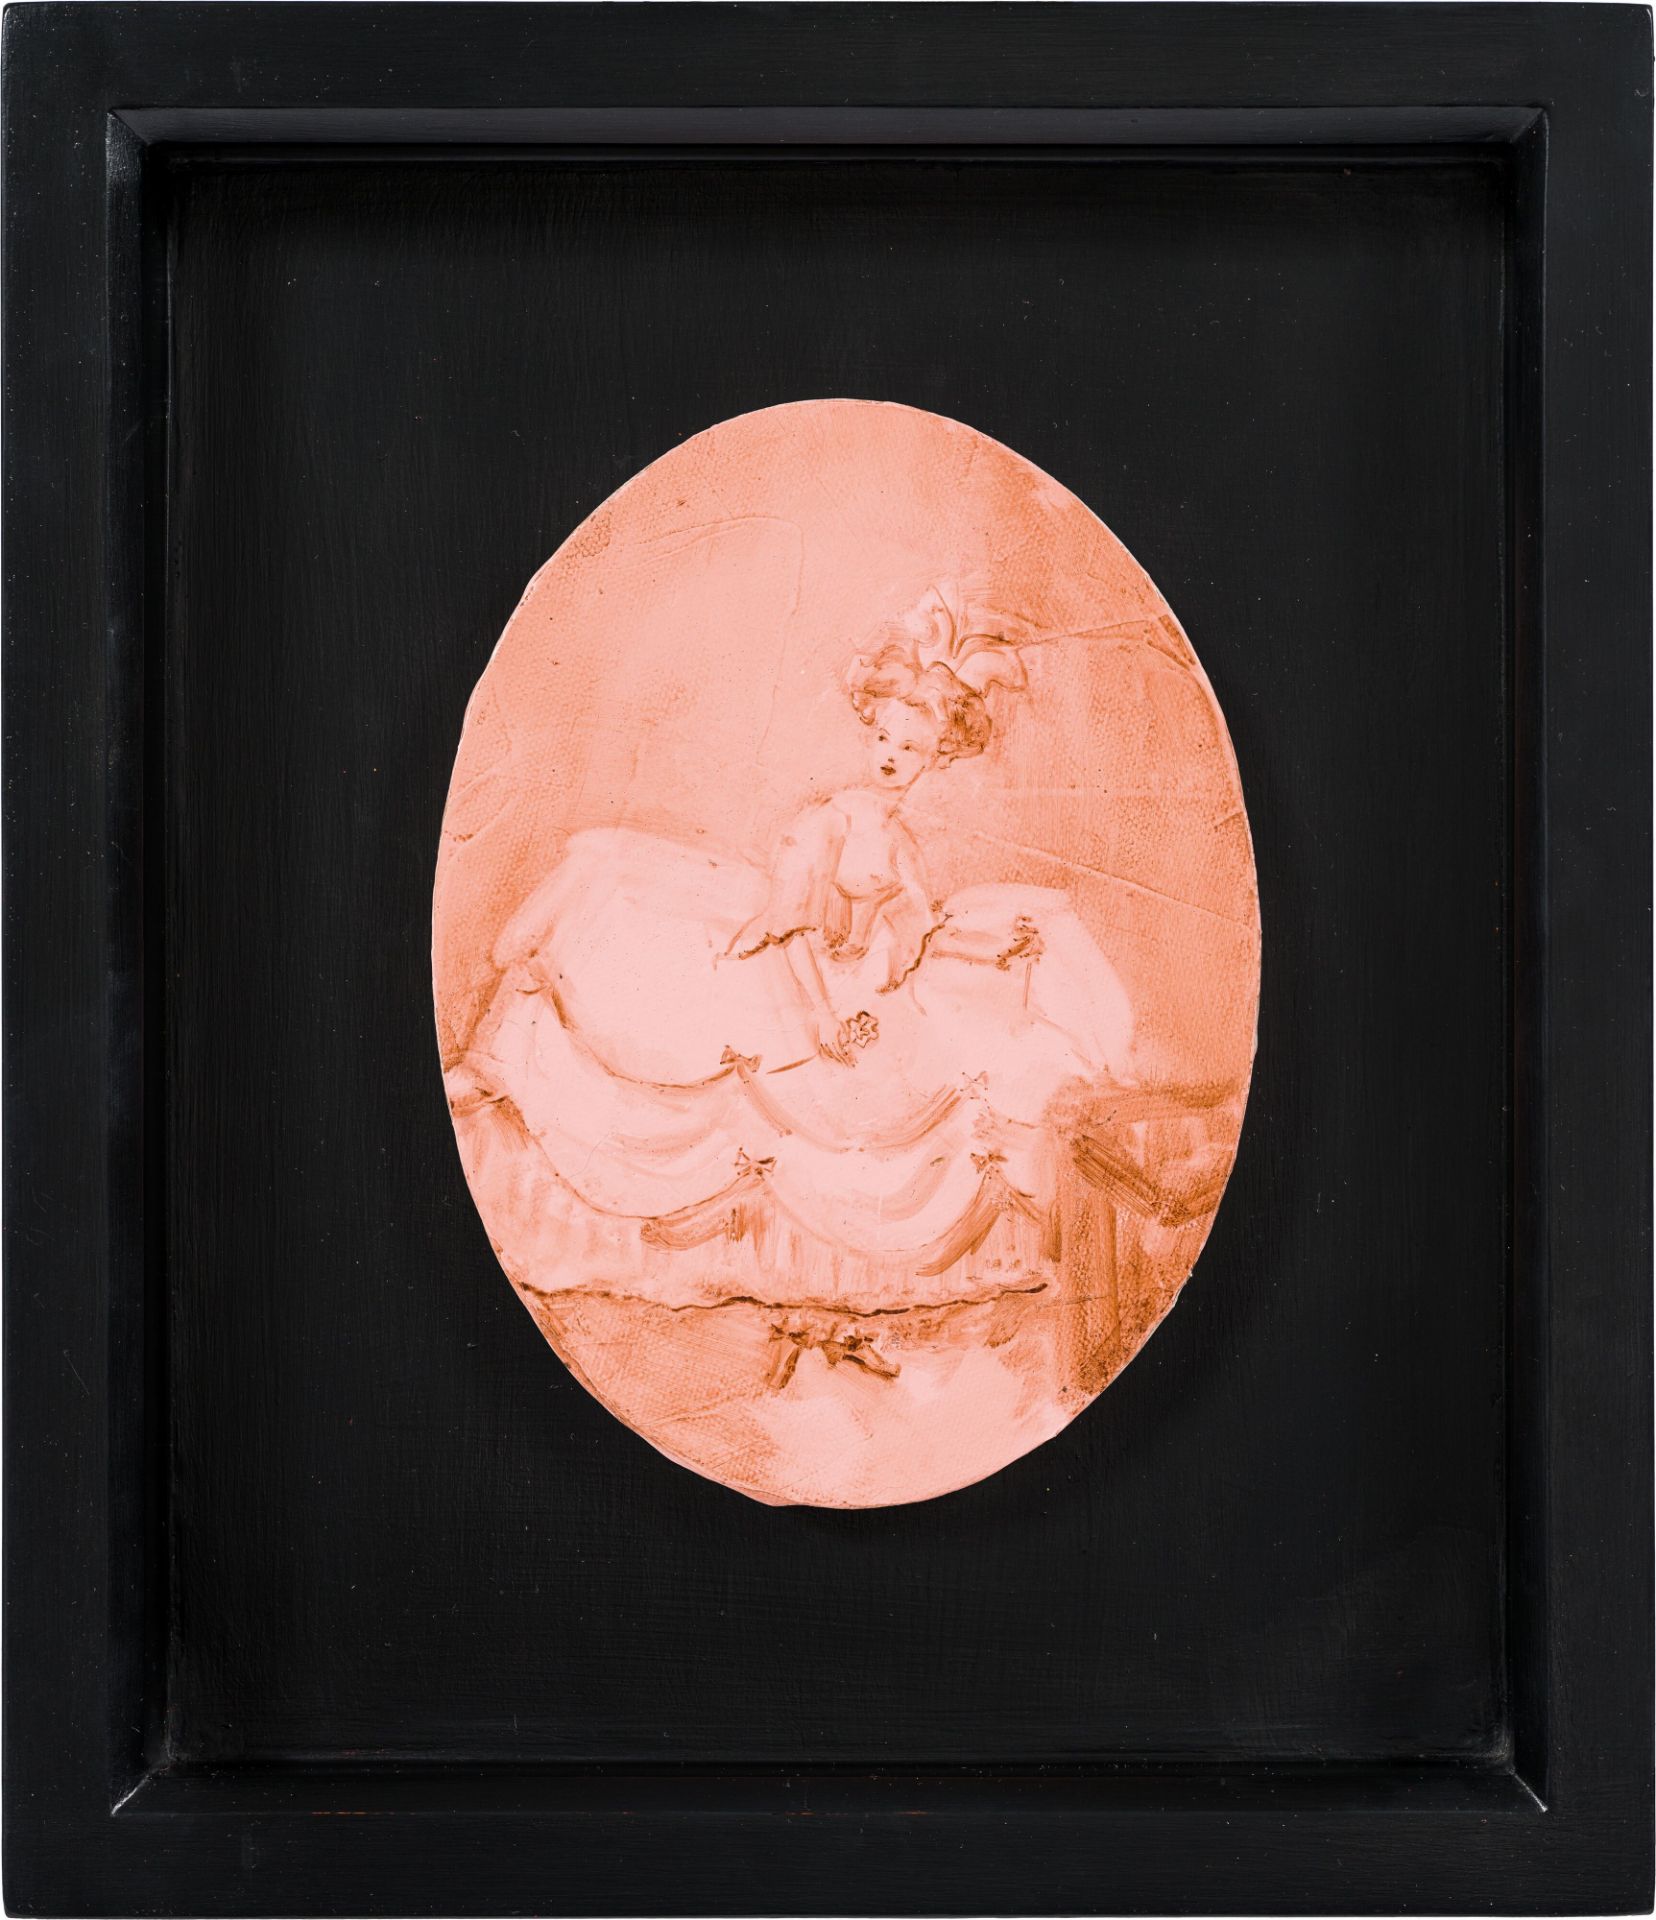 Elizabeth PeytonMarie Antoinette1993oil on canvas; framed20 x 15 cminscribed, dedicated, dated and - Image 2 of 3